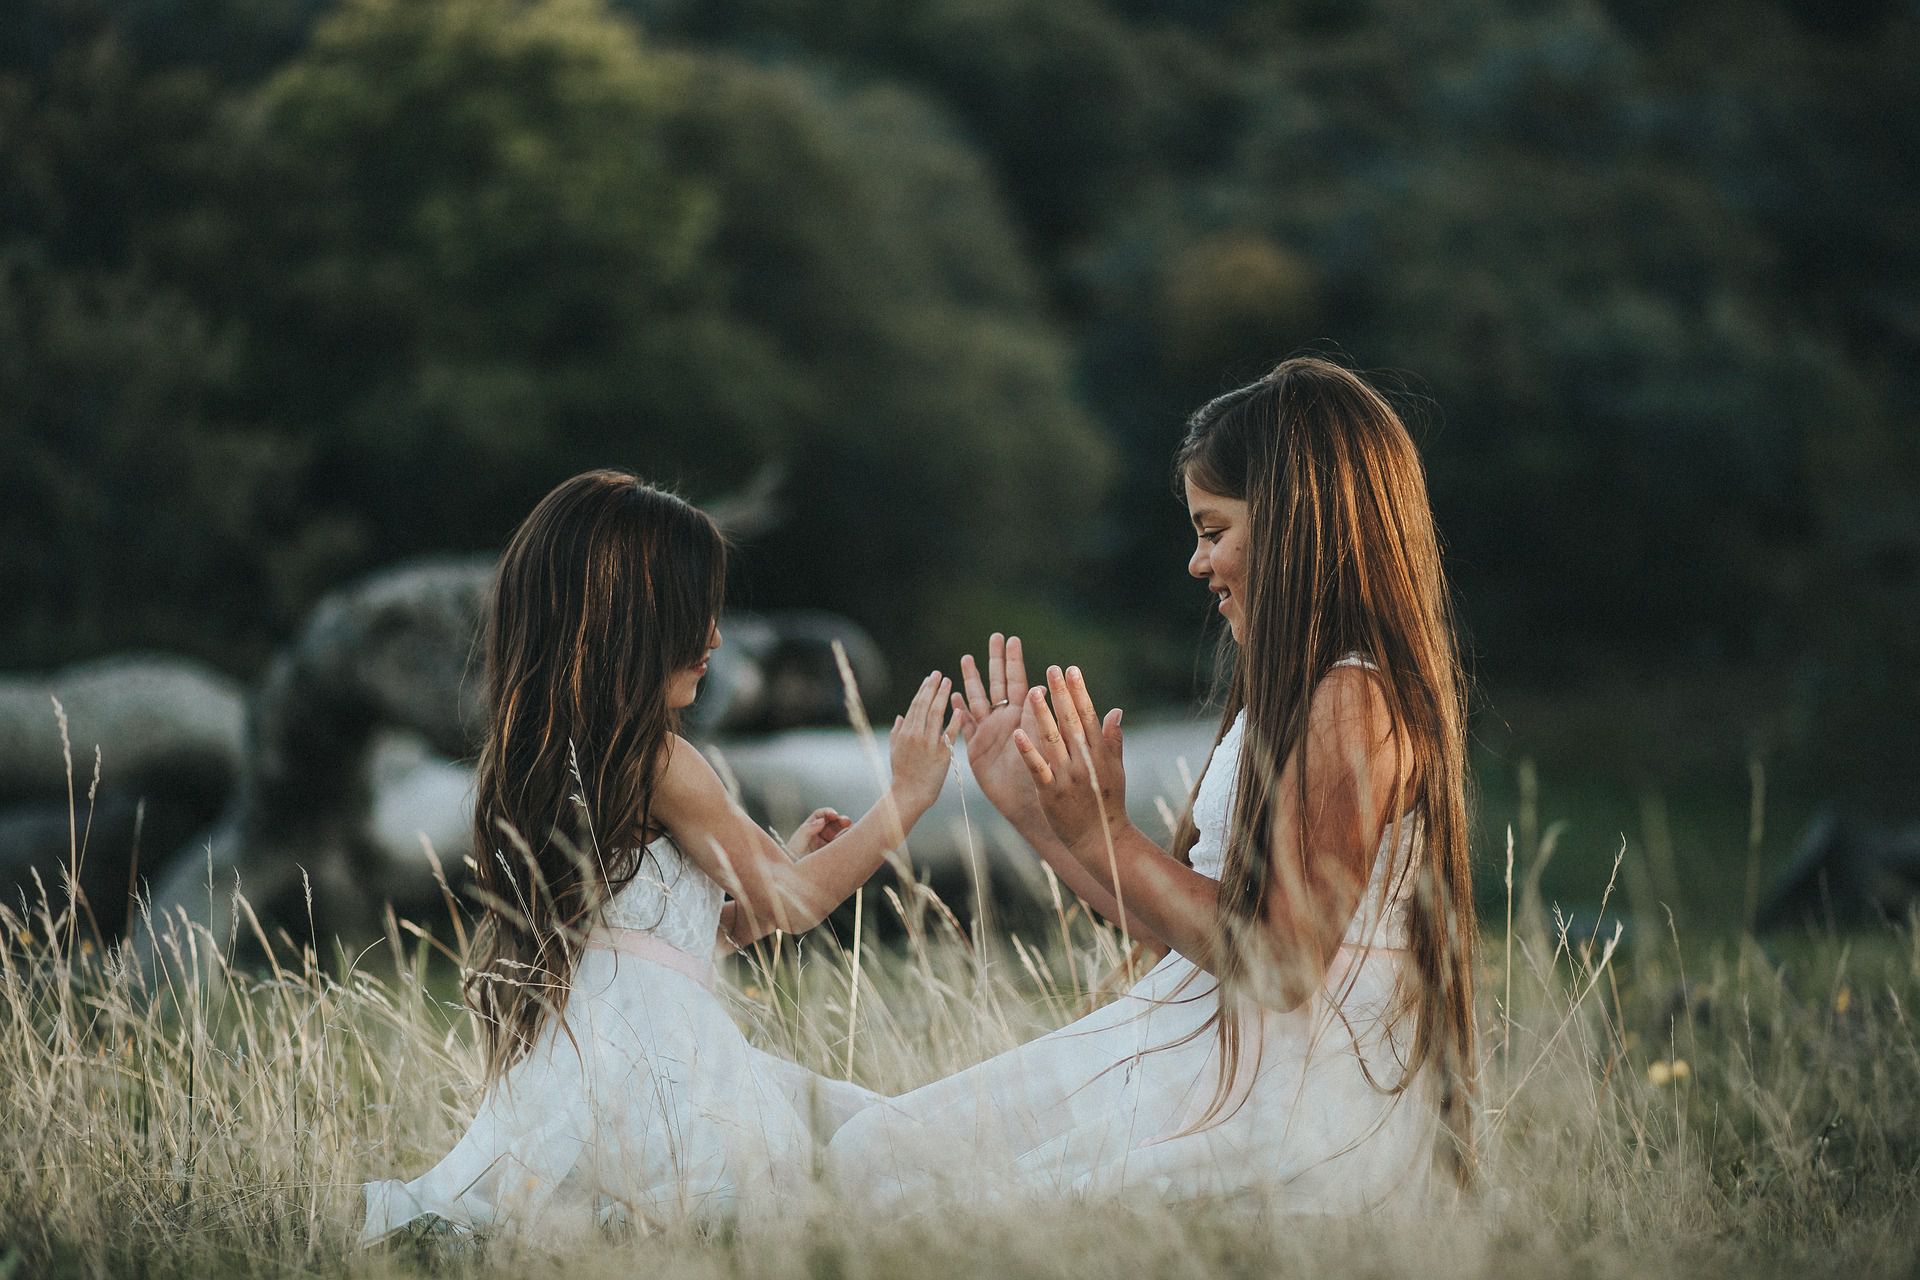 photography ideas for sisters